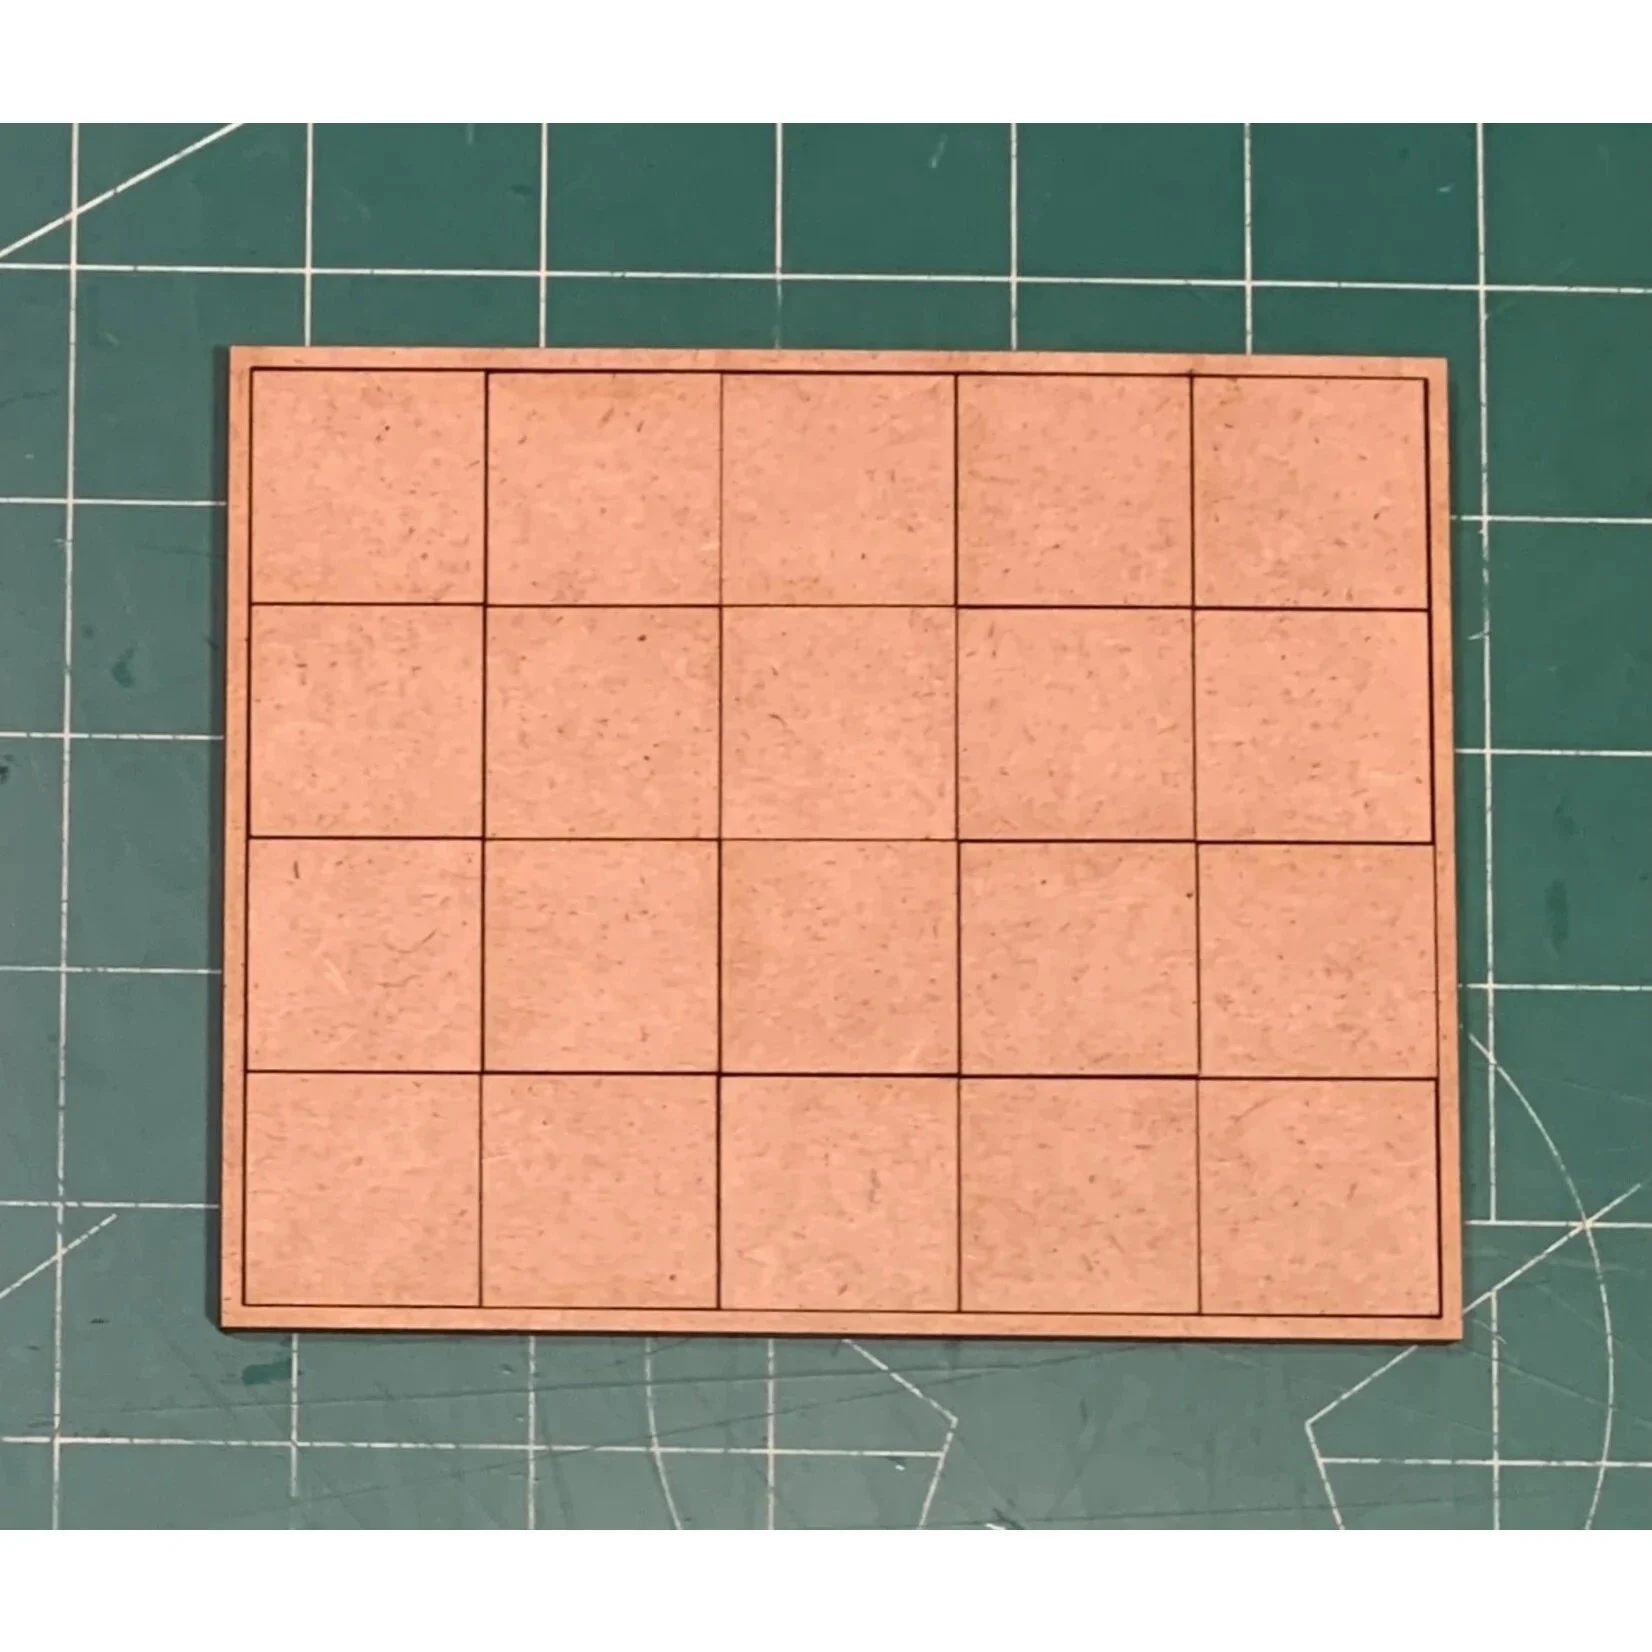 Phalanx Games & Sundry Pair of 20mm Square Rank & File Trays (20 Figure) 5/5/5/5 Linear